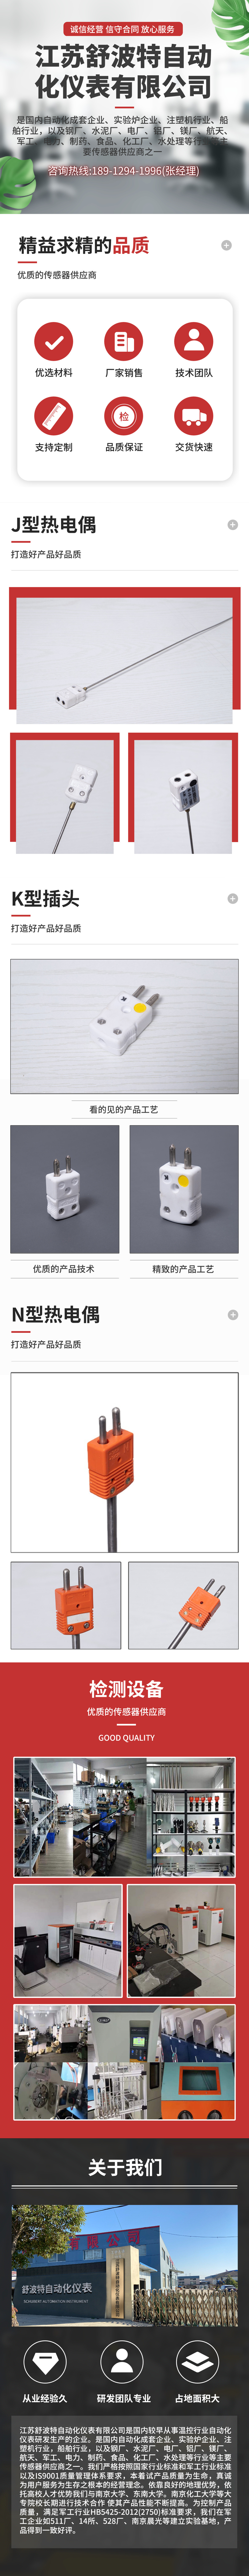 K-type thermocouple ceramic small plug socket high-temperature resistant male female joint J-type temperature measuring ceramic plug Schubert